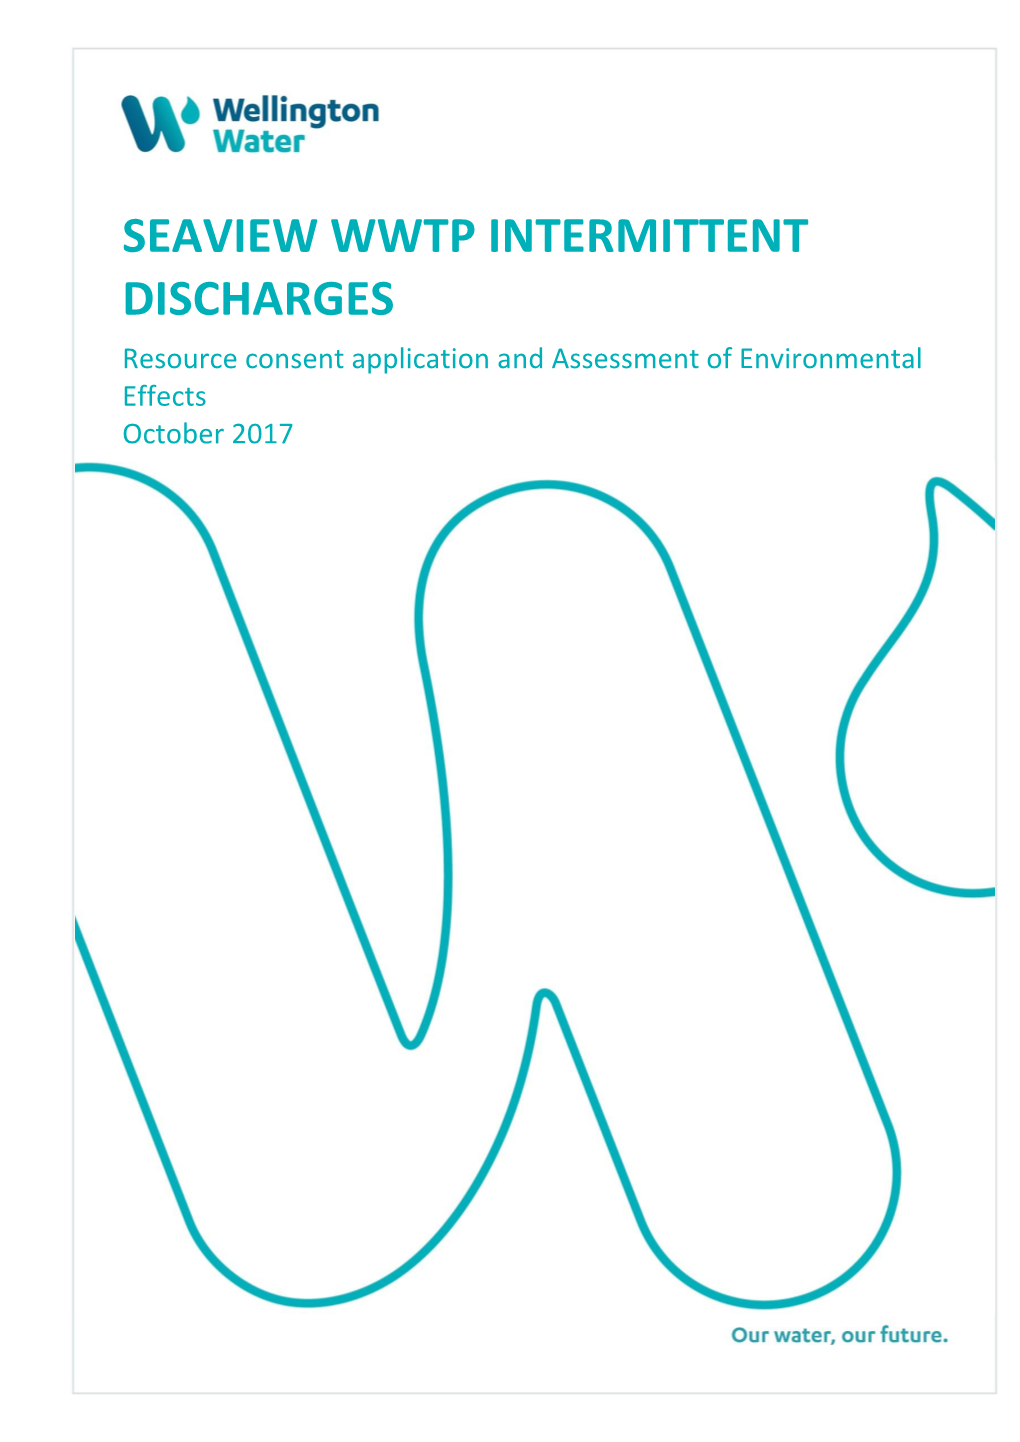 SEAVIEW WWTP INTERMITTENT DISCHARGES Resource Consent Application and Assessment of Environmental Effects October 2017